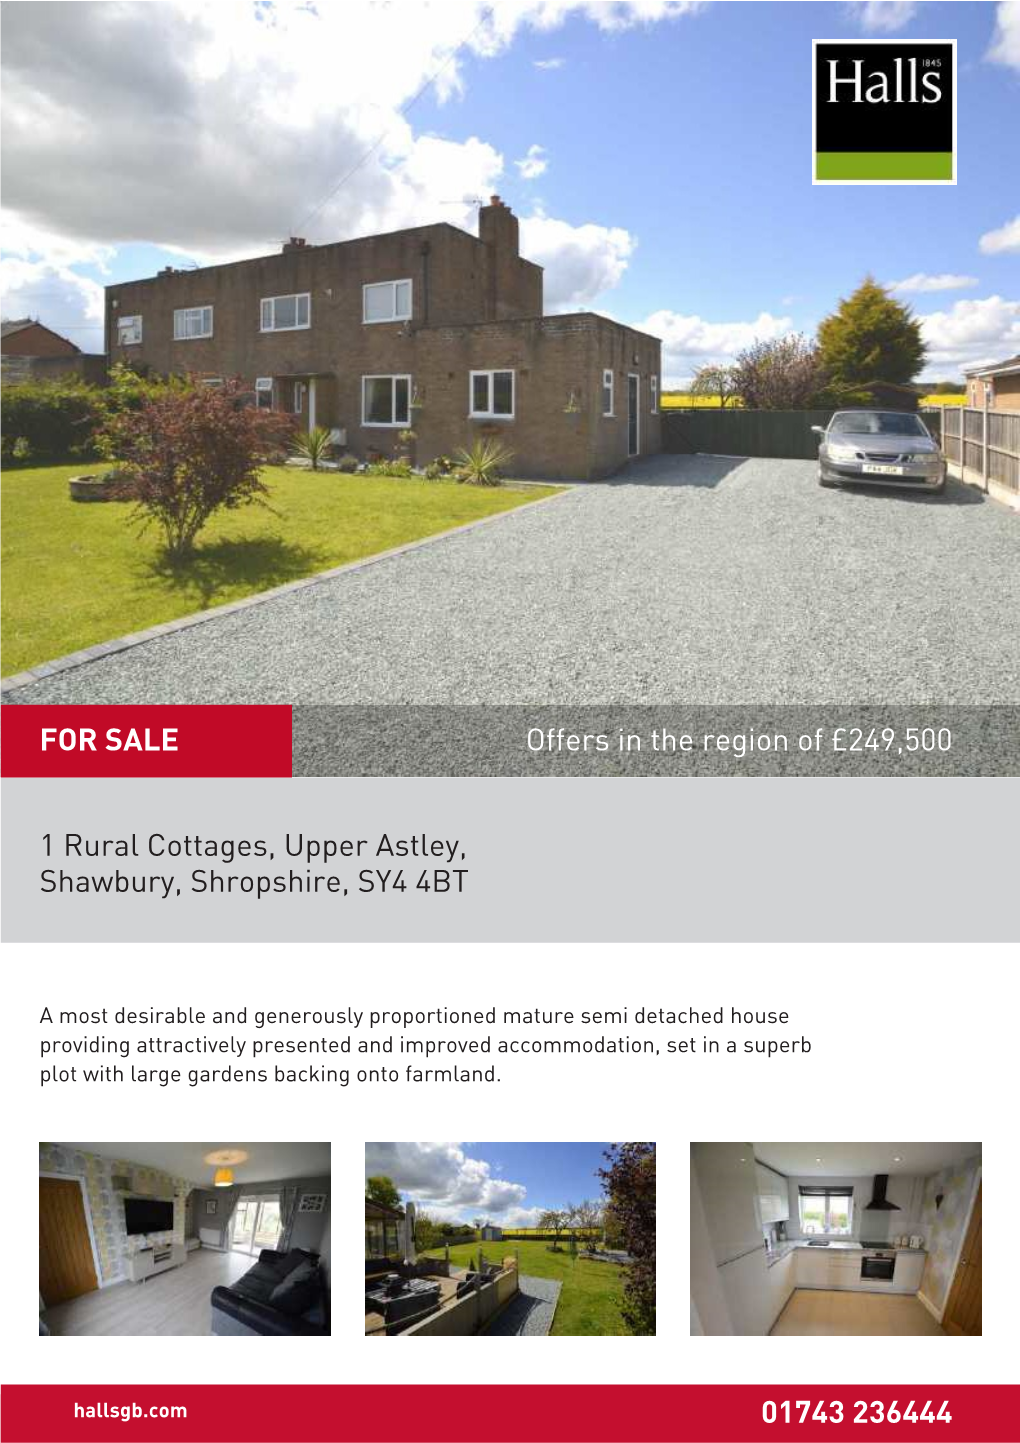 1 Rural Cottages, Upper Astley, Shawbury, Shropshire, SY4 4BT 01743 236444 Offers in the Region of £249,500 for SALE